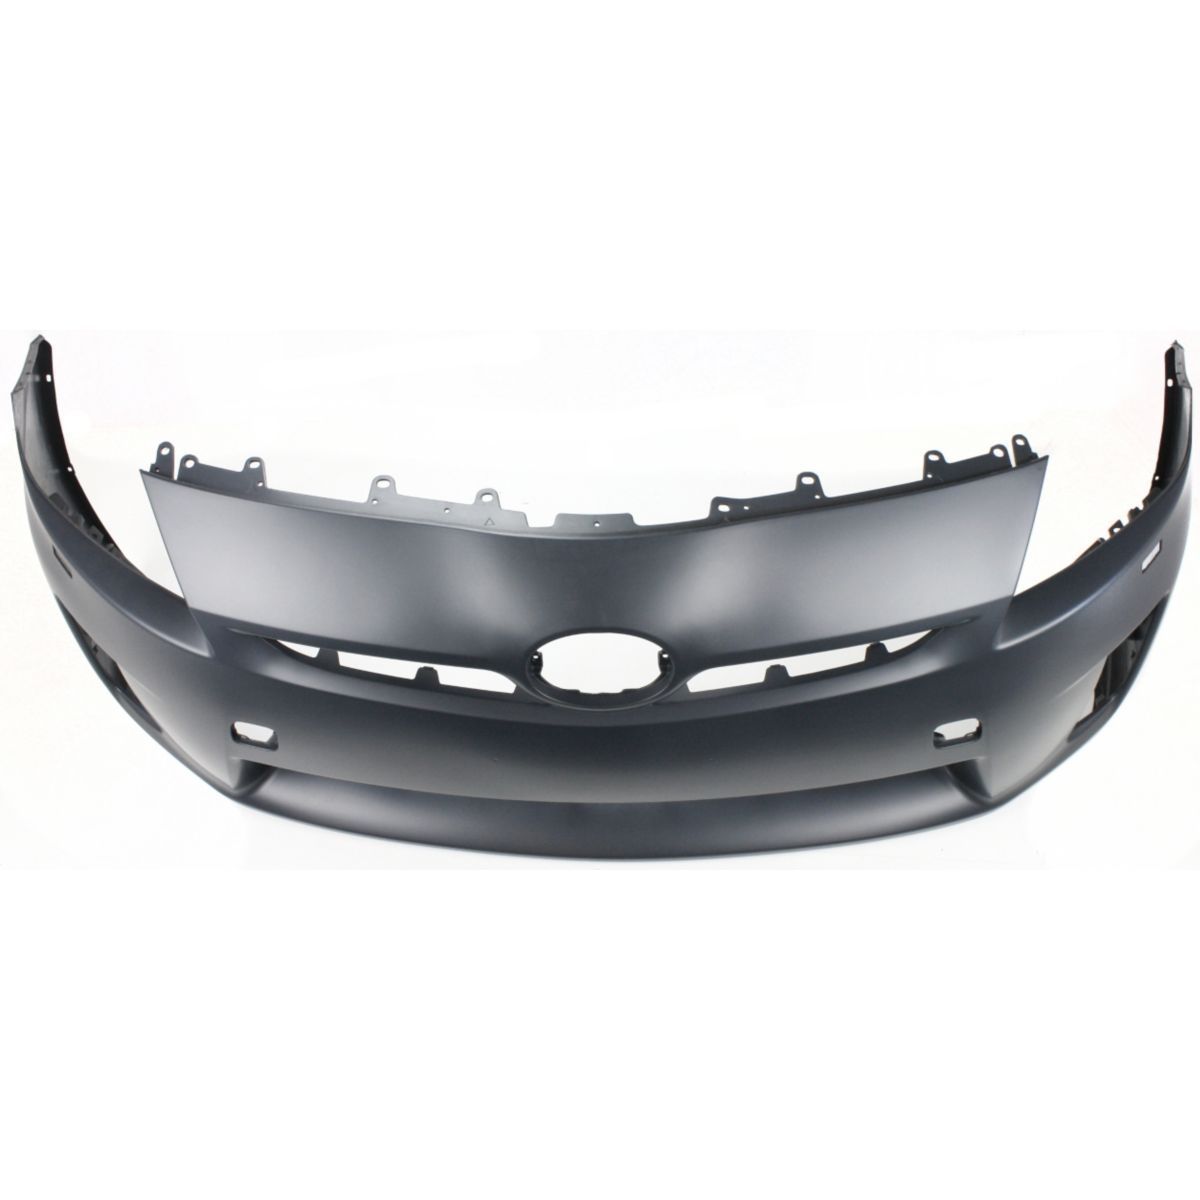 Toyota Prius 2010 - 2011 Front Bumper Cover 10 - 11 TO1000360 Bumper King